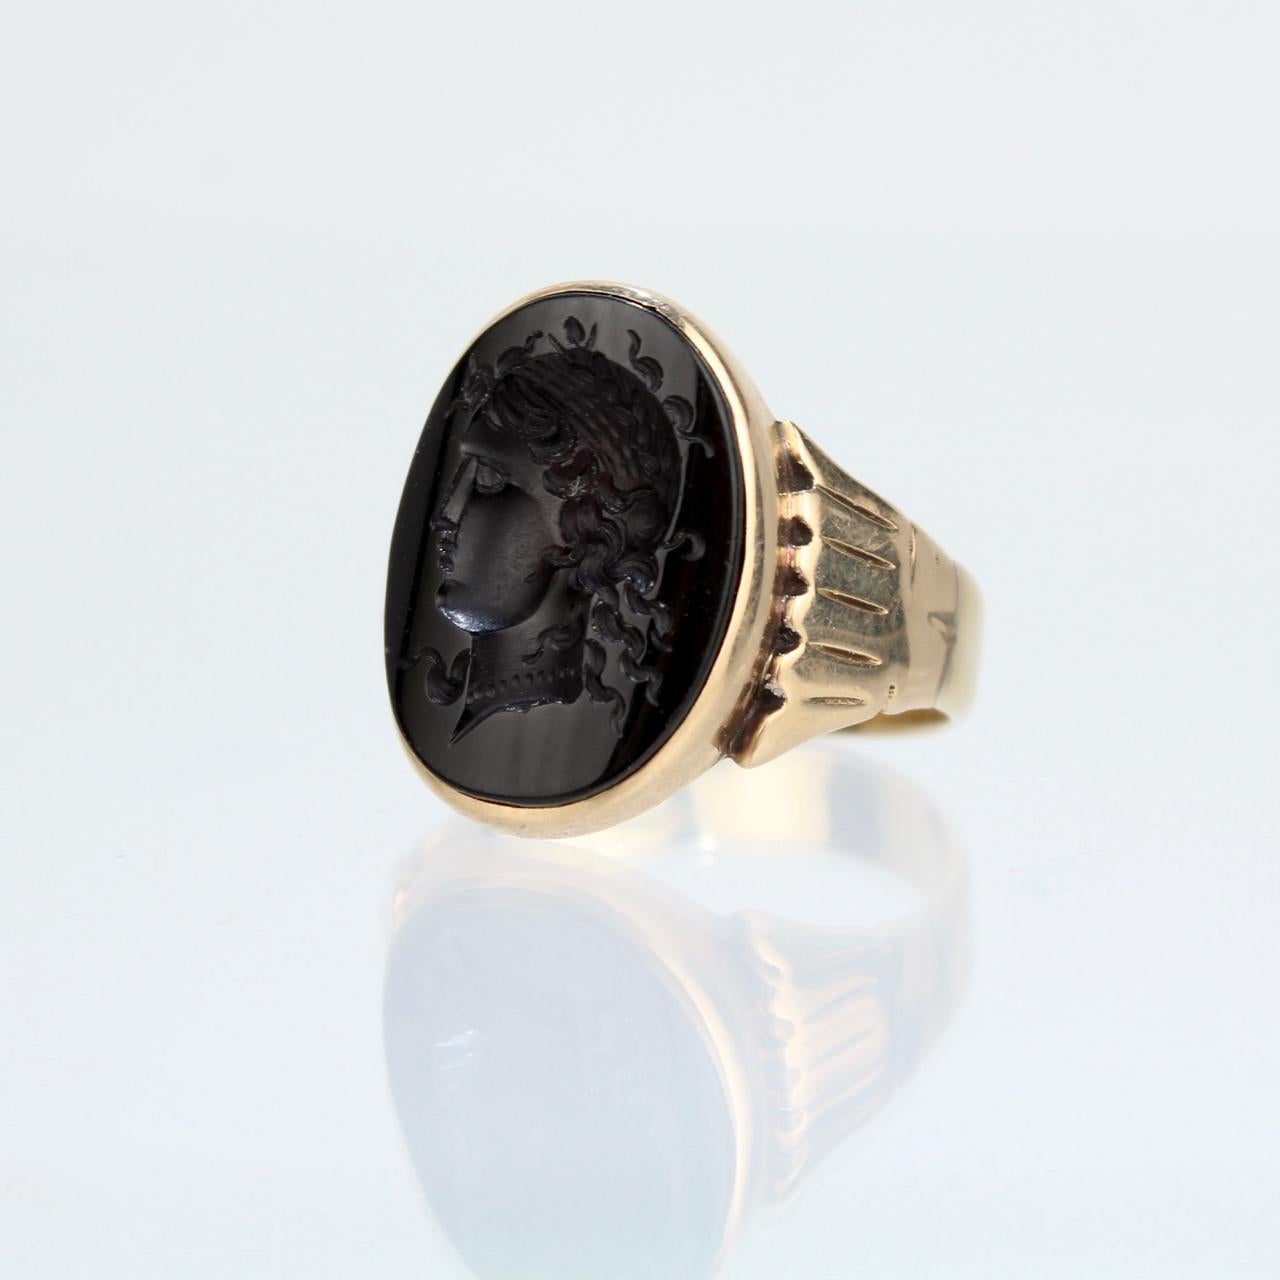 Cabochon Antique Victorian Cameo 14 Karat Gold & Onyx Signet Ring with Dedication